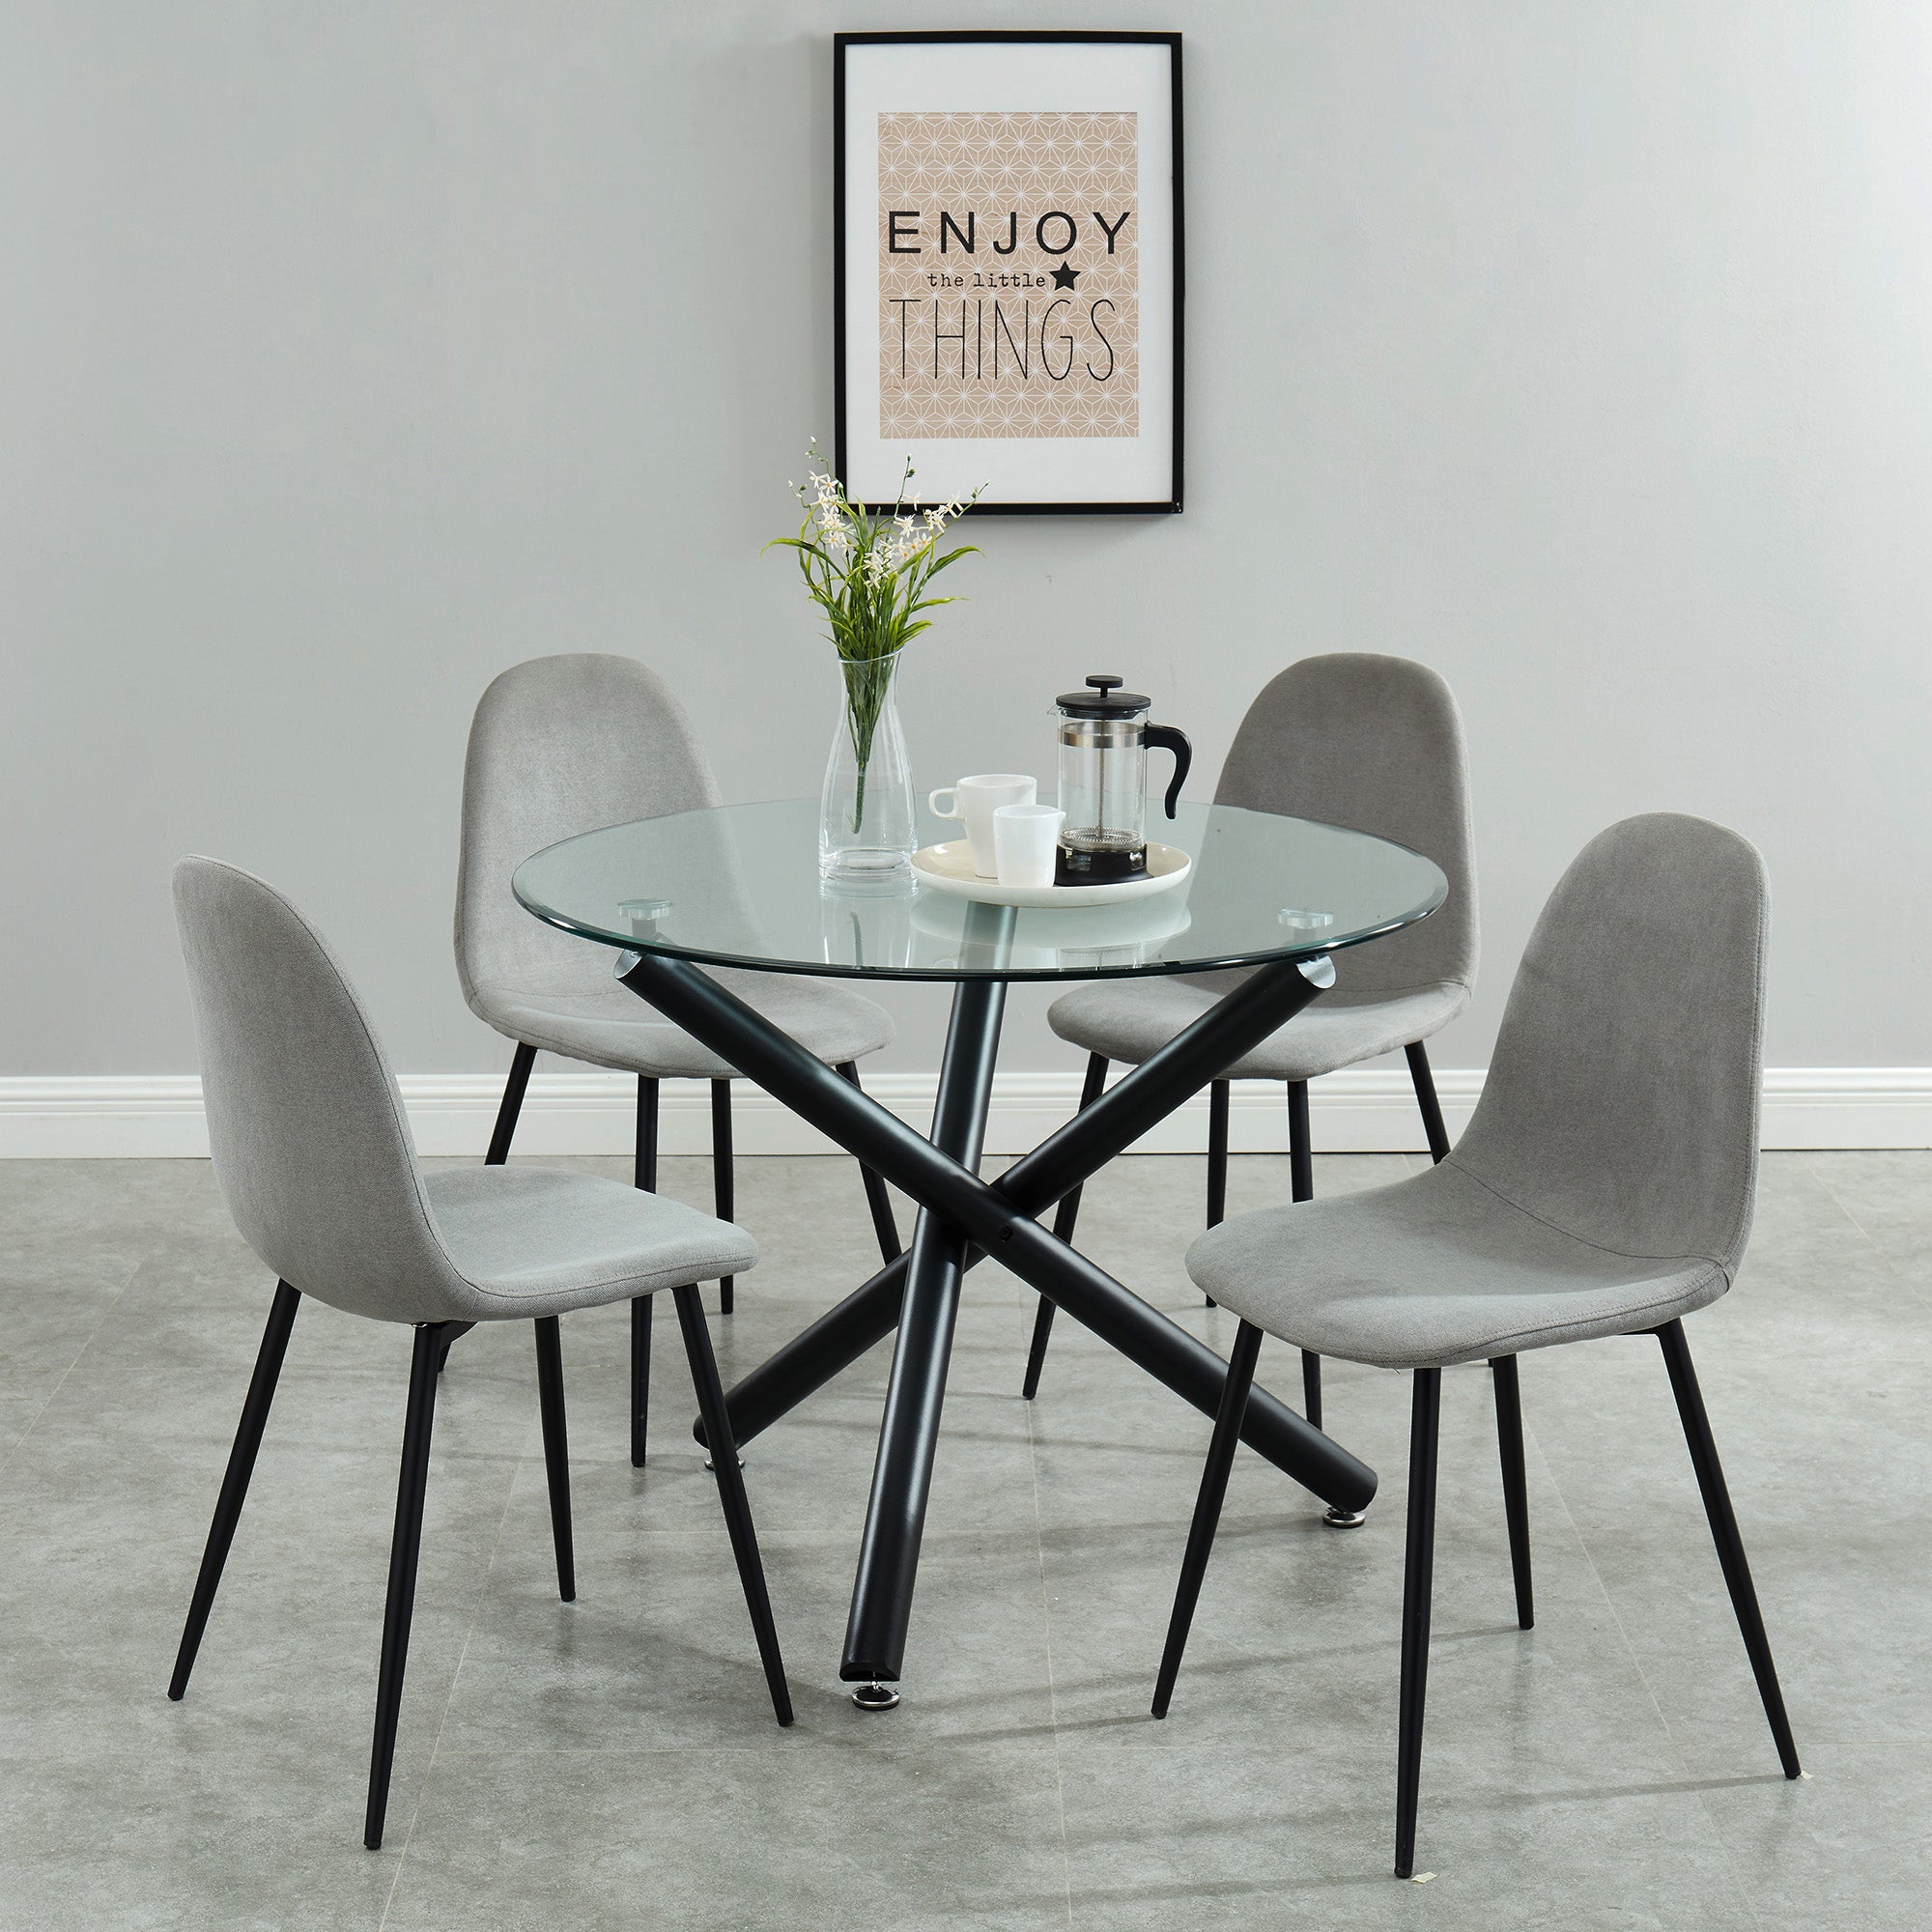 SUZETTE-DINING TABLE, 40"dia-BLACK / OLLY GREY CHAIRS-5PC DINING SET